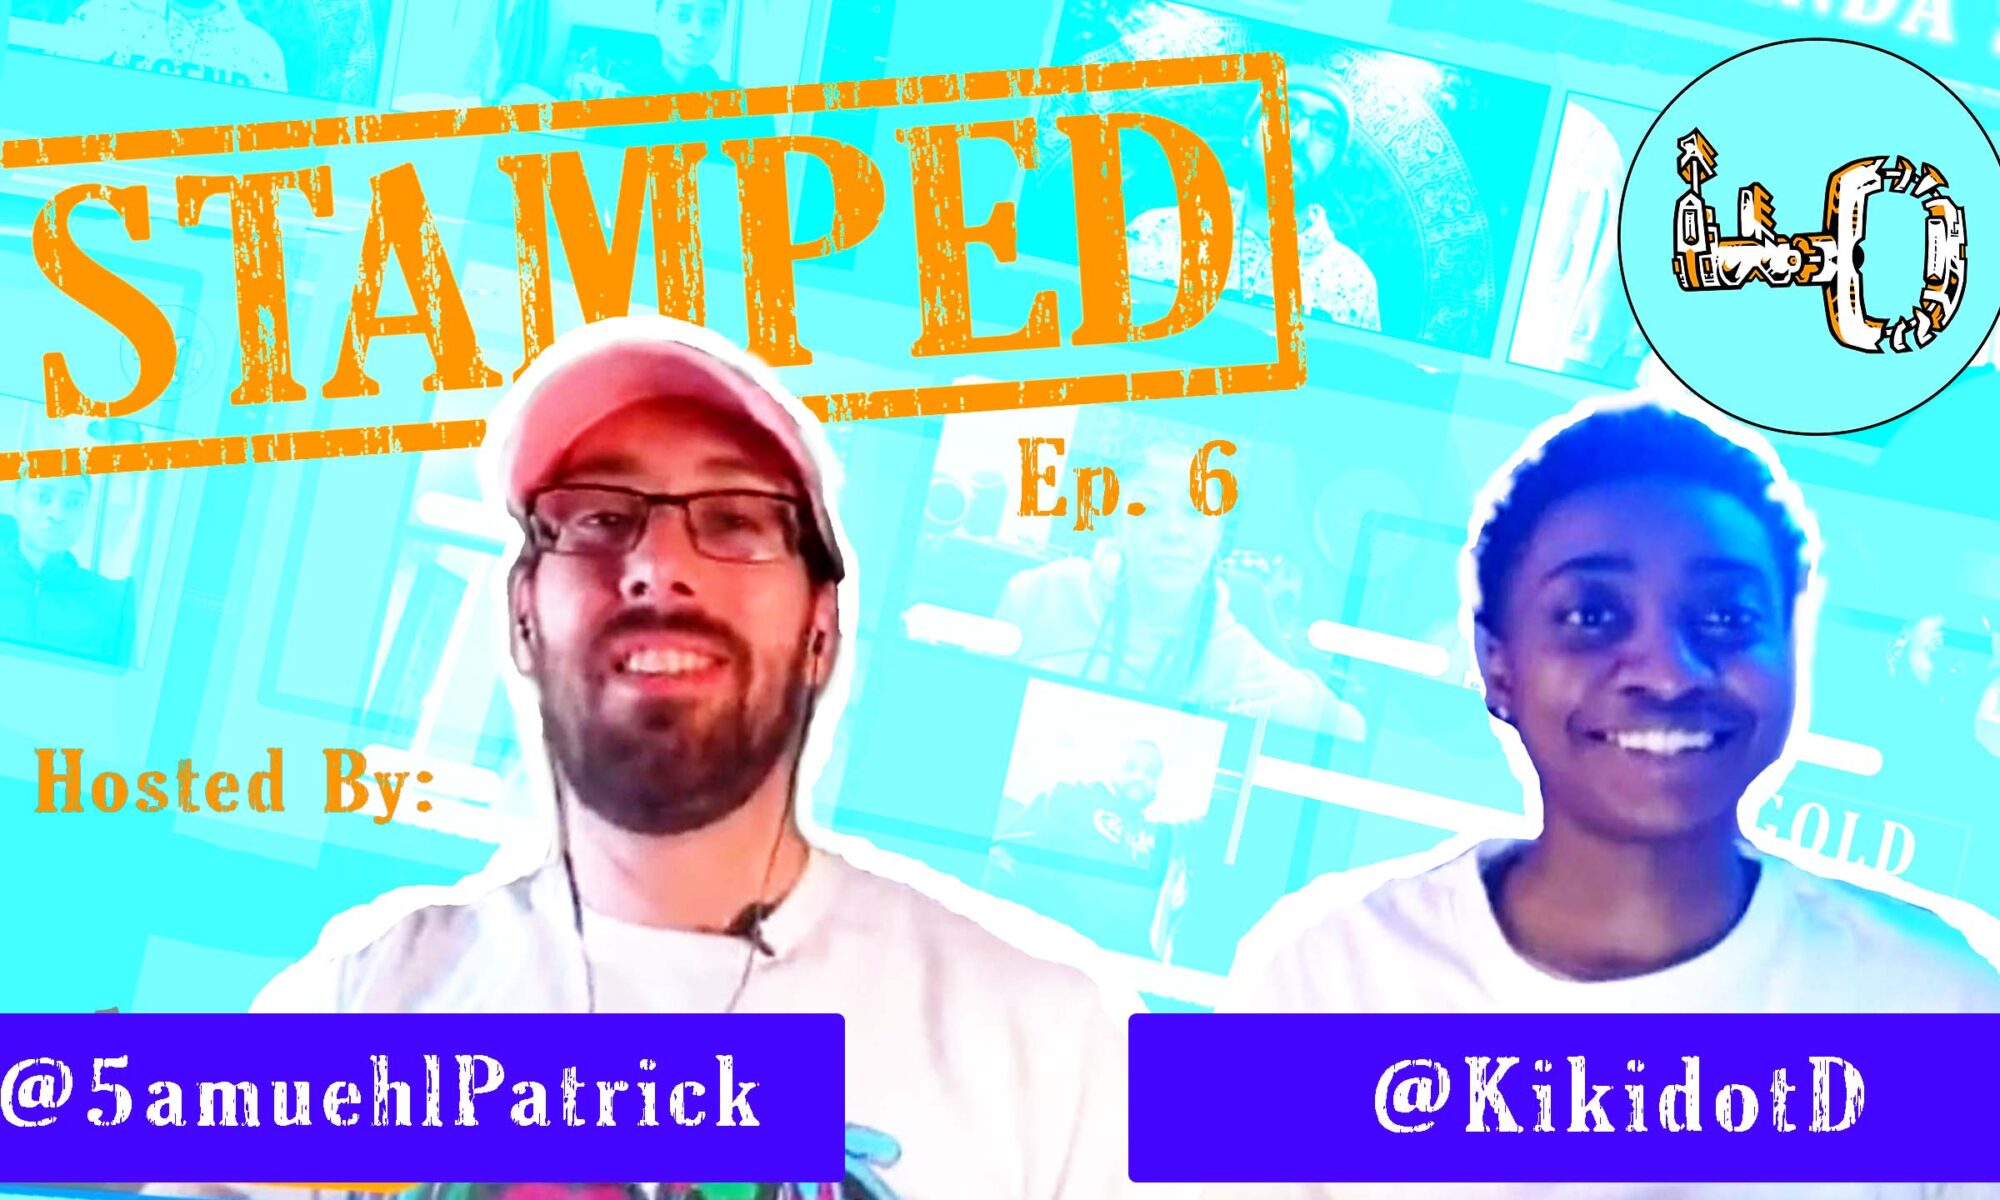 Thumbnail of STAMPED ep. 6 YouTube Video featuring KikidotD and Samuel Patrick